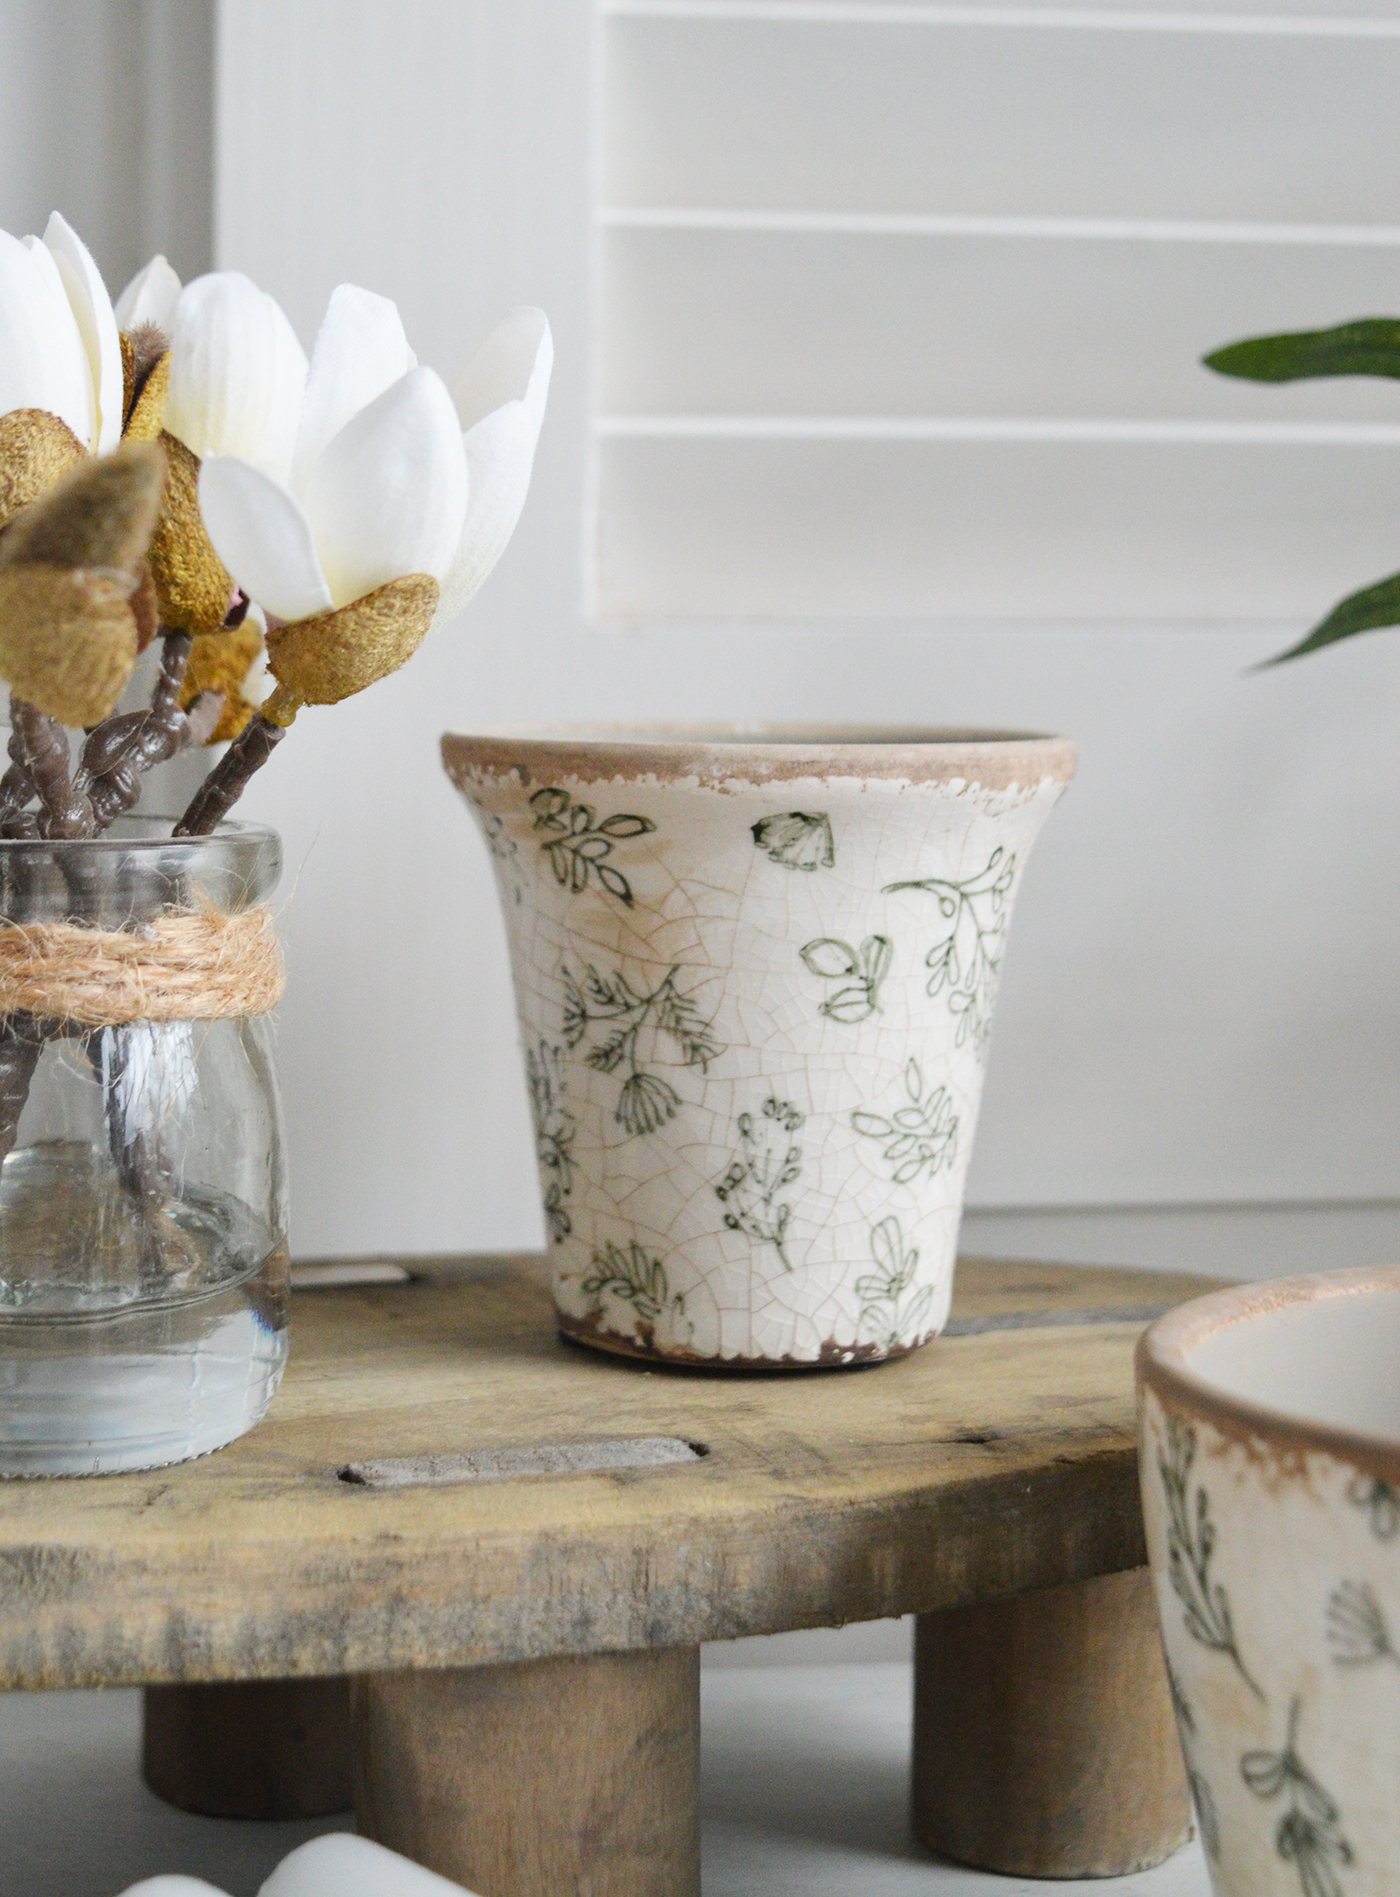 Westbrook Green and Aged White Ceramics - New England, coastal, modern farmhouse and country homes interiors and furniture